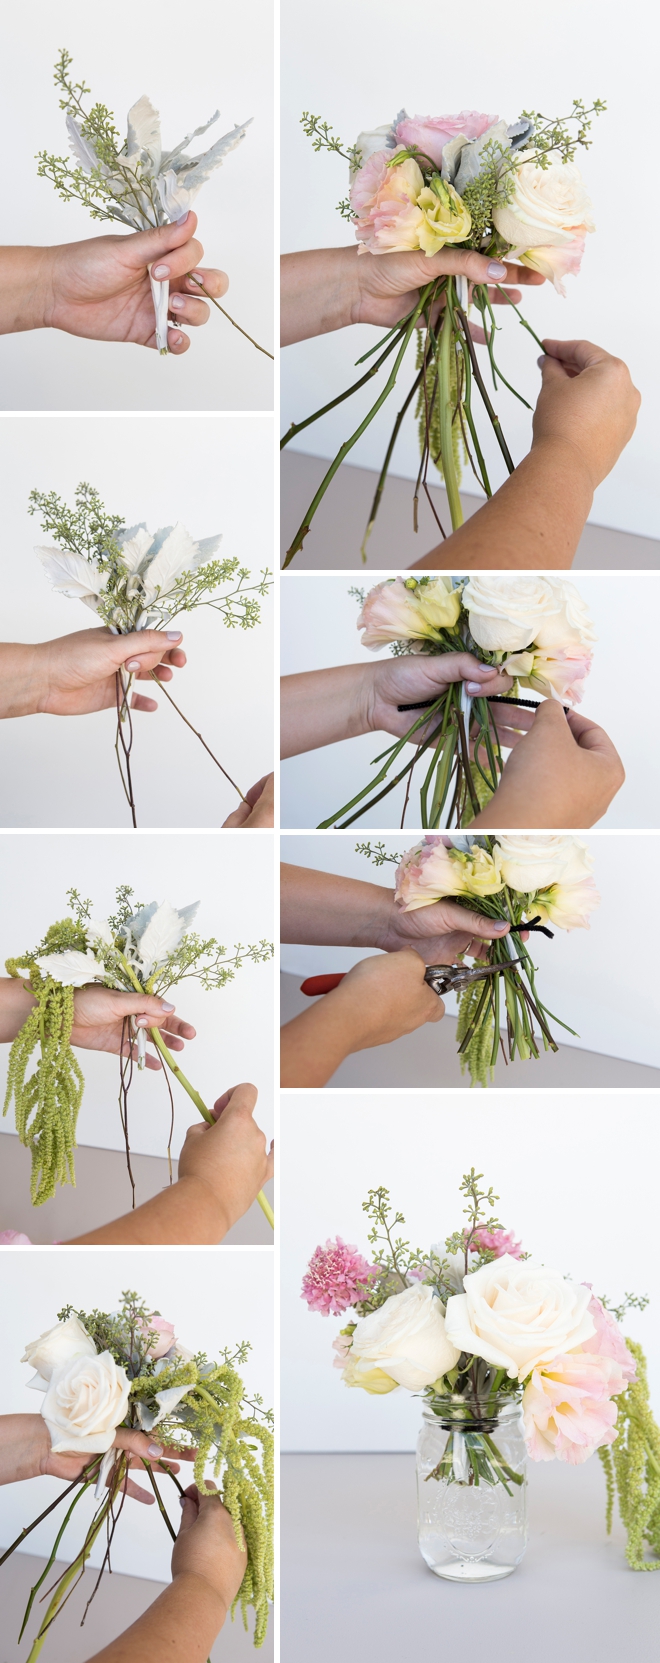 Learn how to arrange your own centerpiece bouquets!